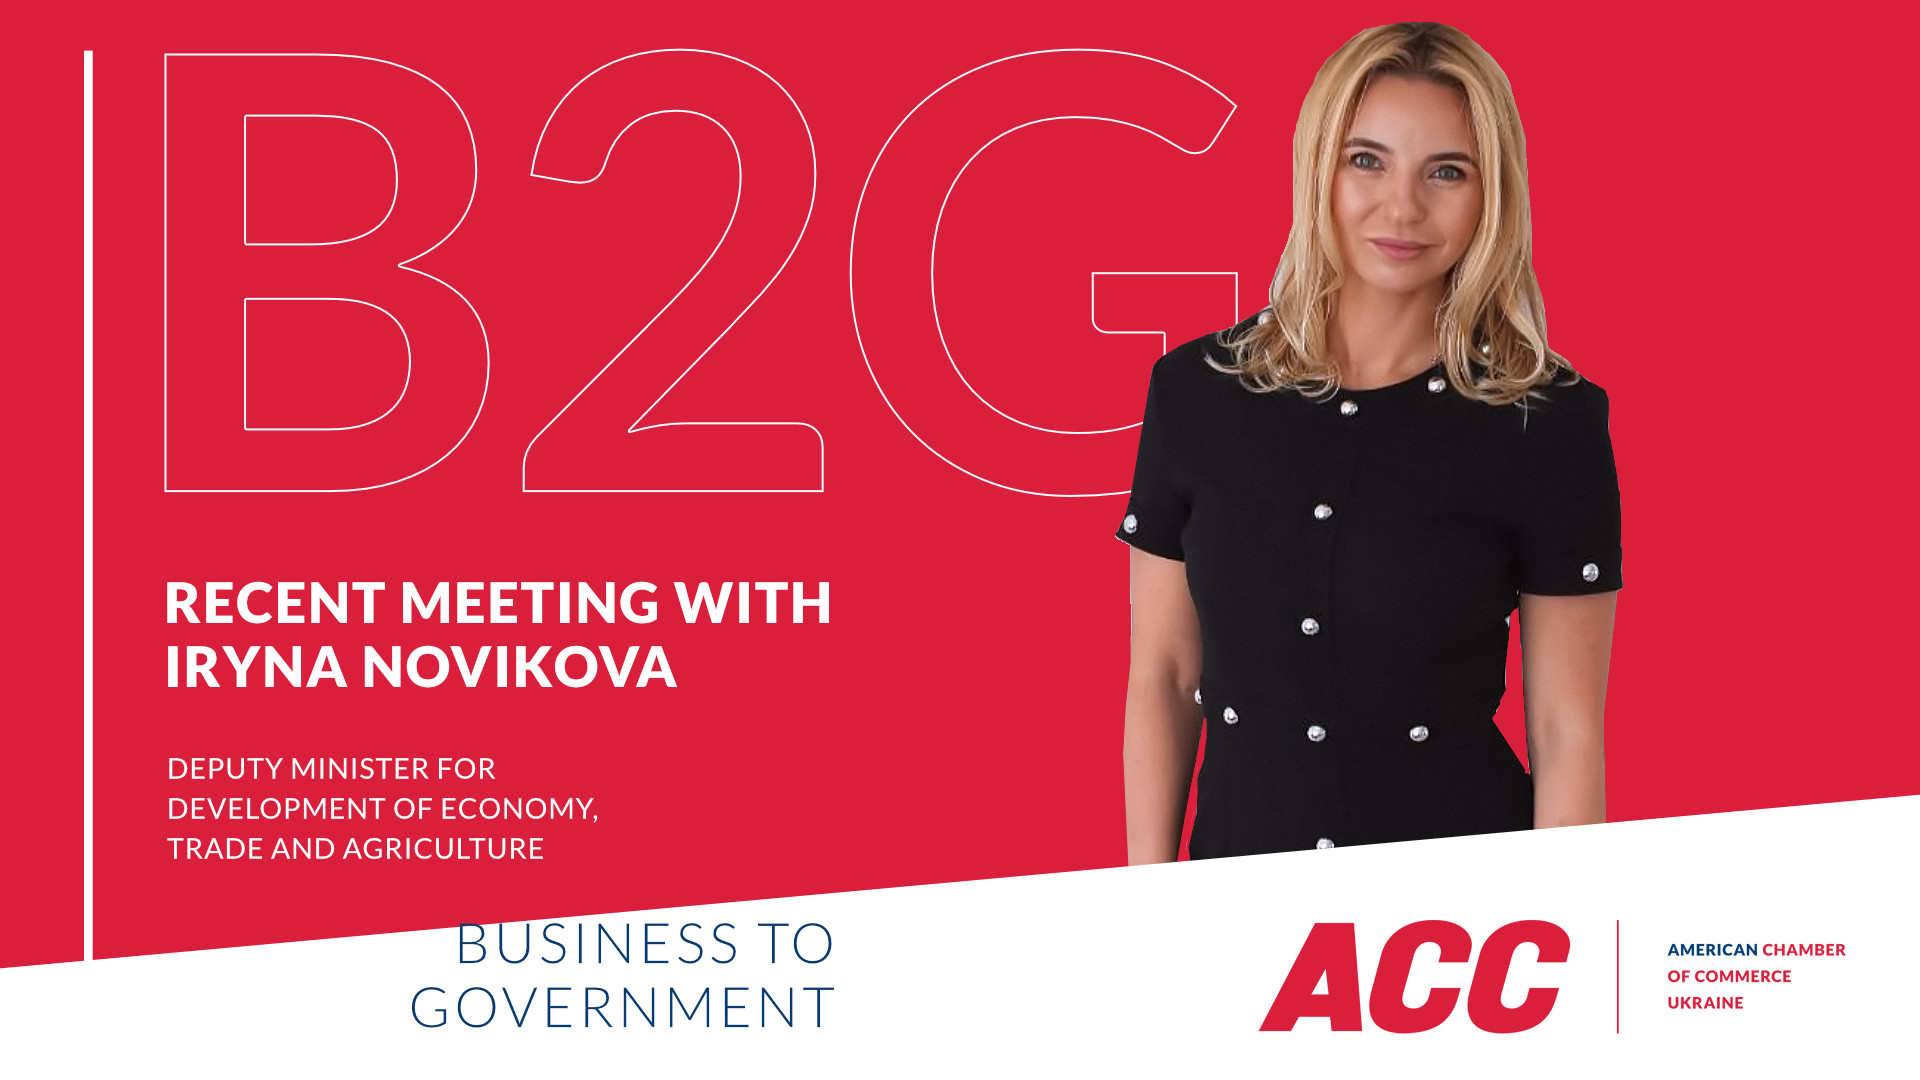 Online Meeting with Iryna Novikova, Deputy Minister for Development of Economy, Trade and Agriculture